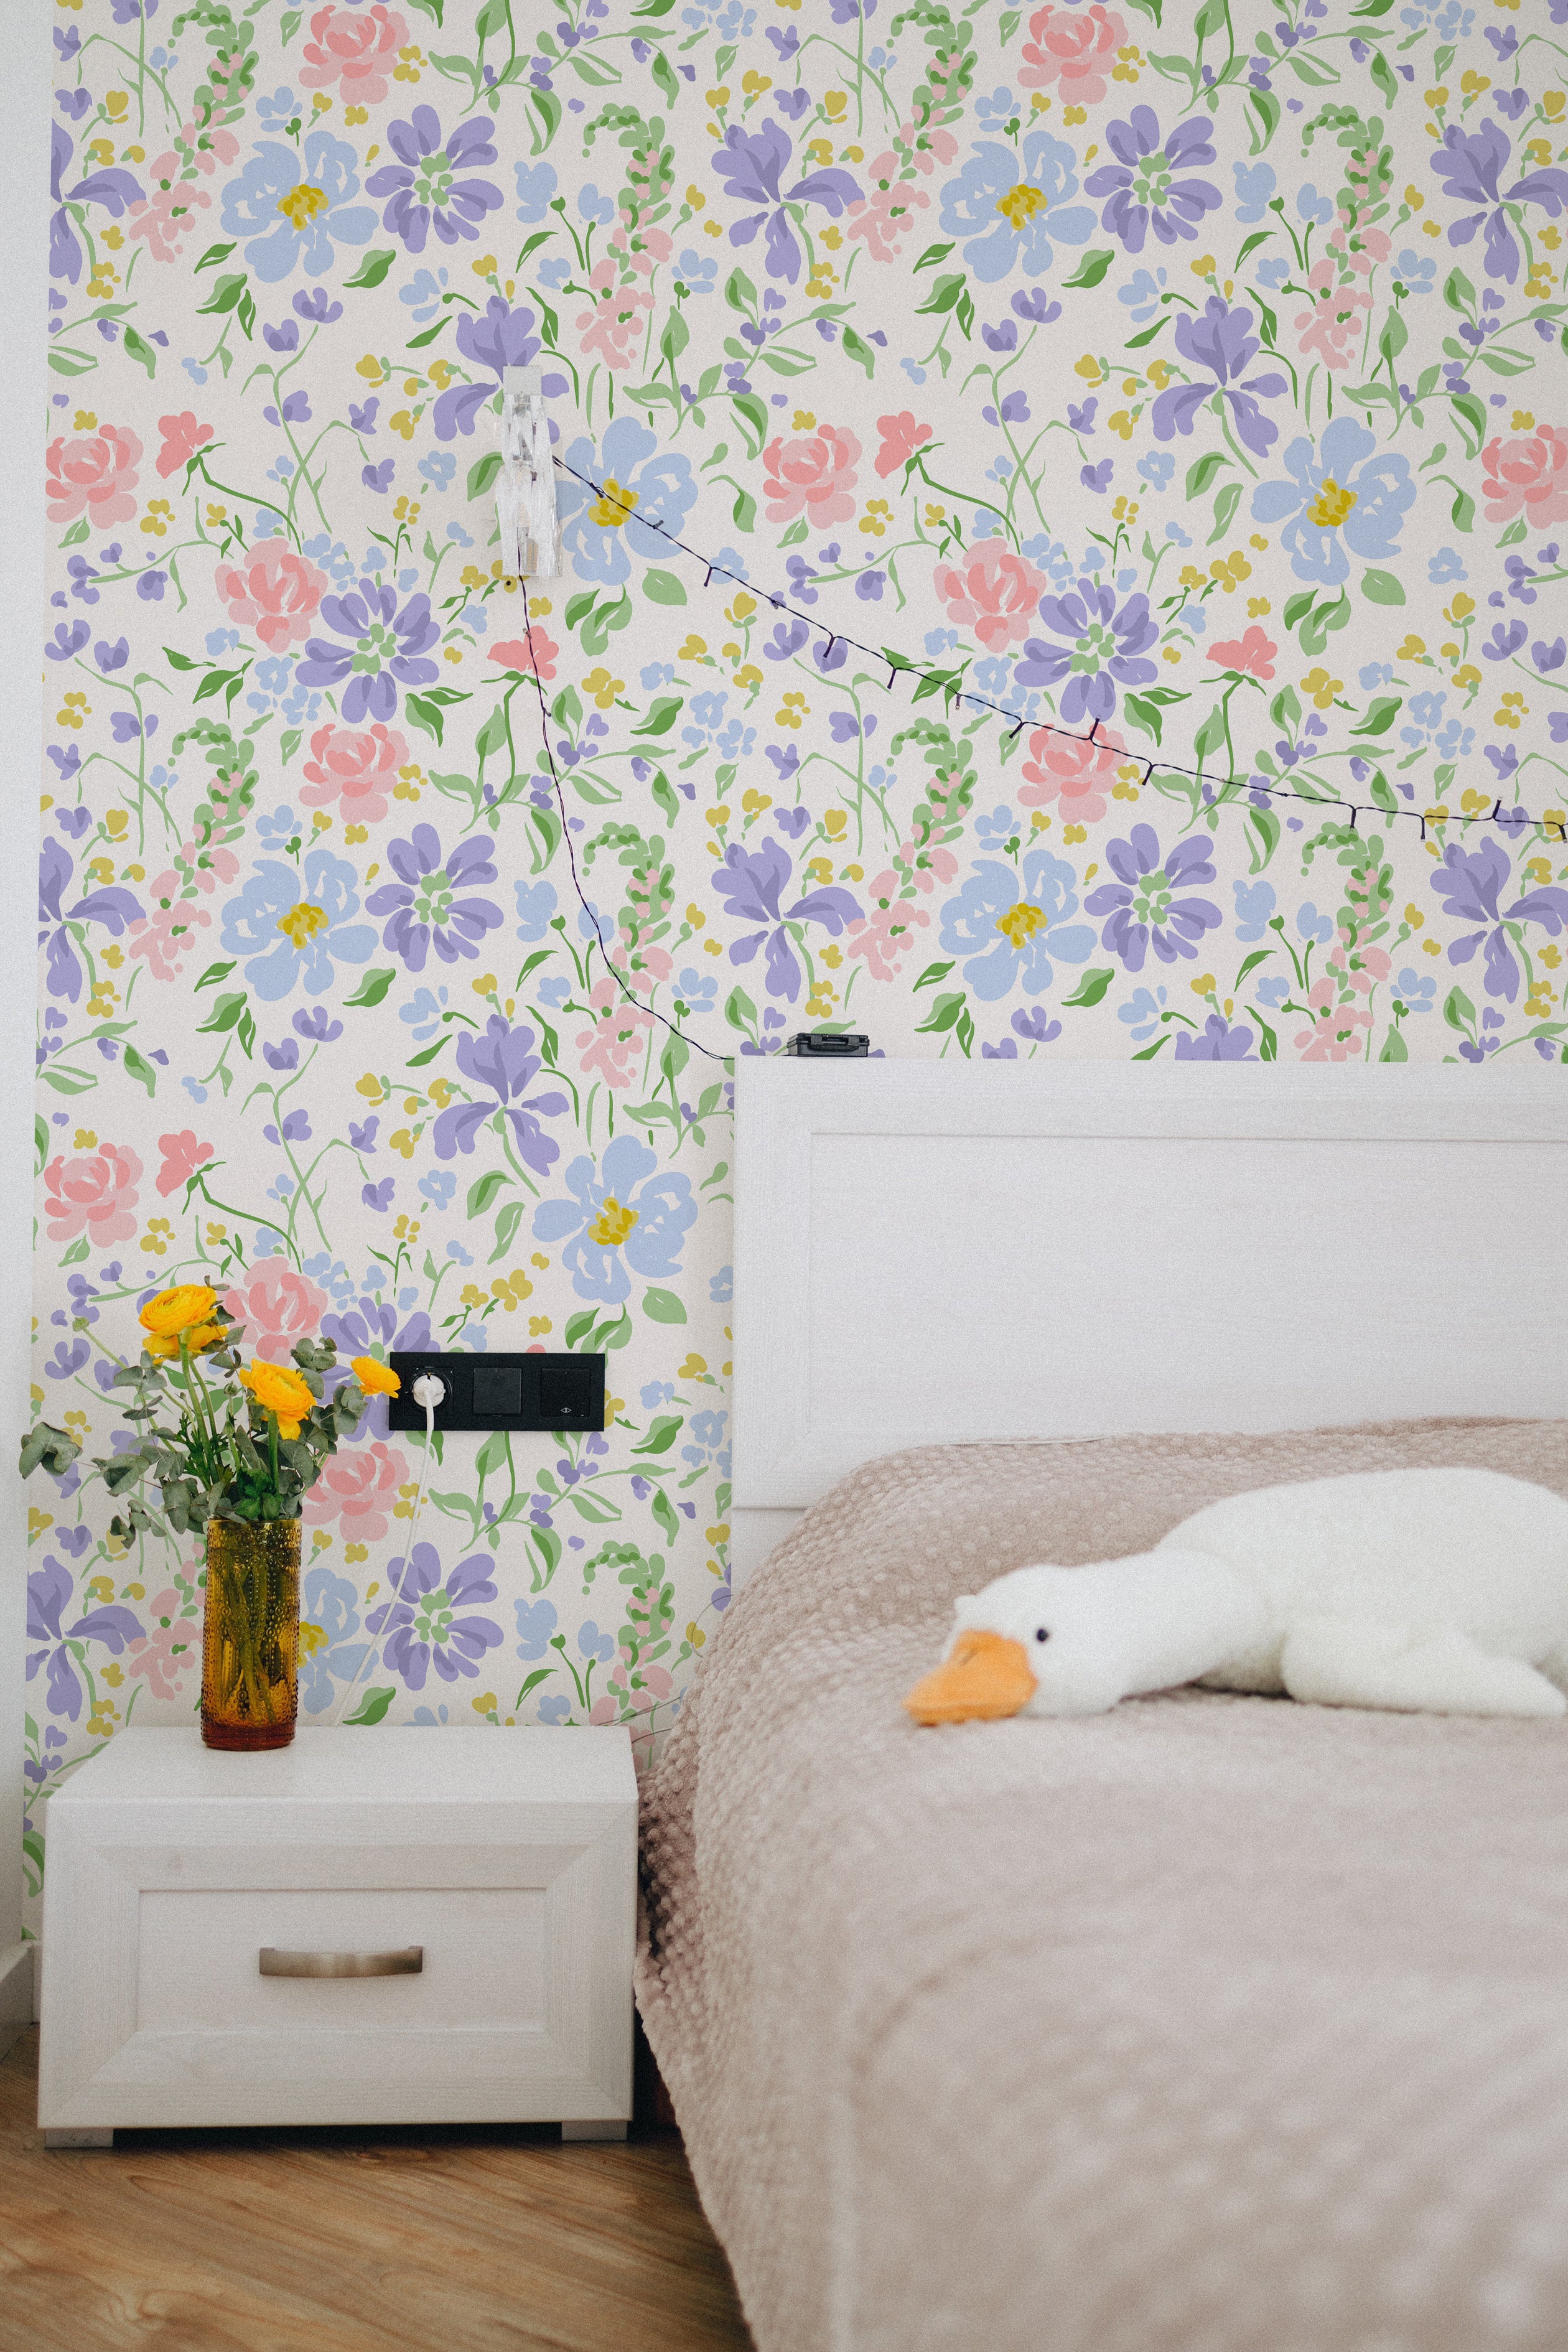 A cozy bedroom corner with Romana Wallpaper displaying a vibrant floral pattern of pink, yellow, and blue flowers on a light cream background. A small white nightstand with books and a vase of fresh yellow roses enhances the room's fresh, inviting feel.